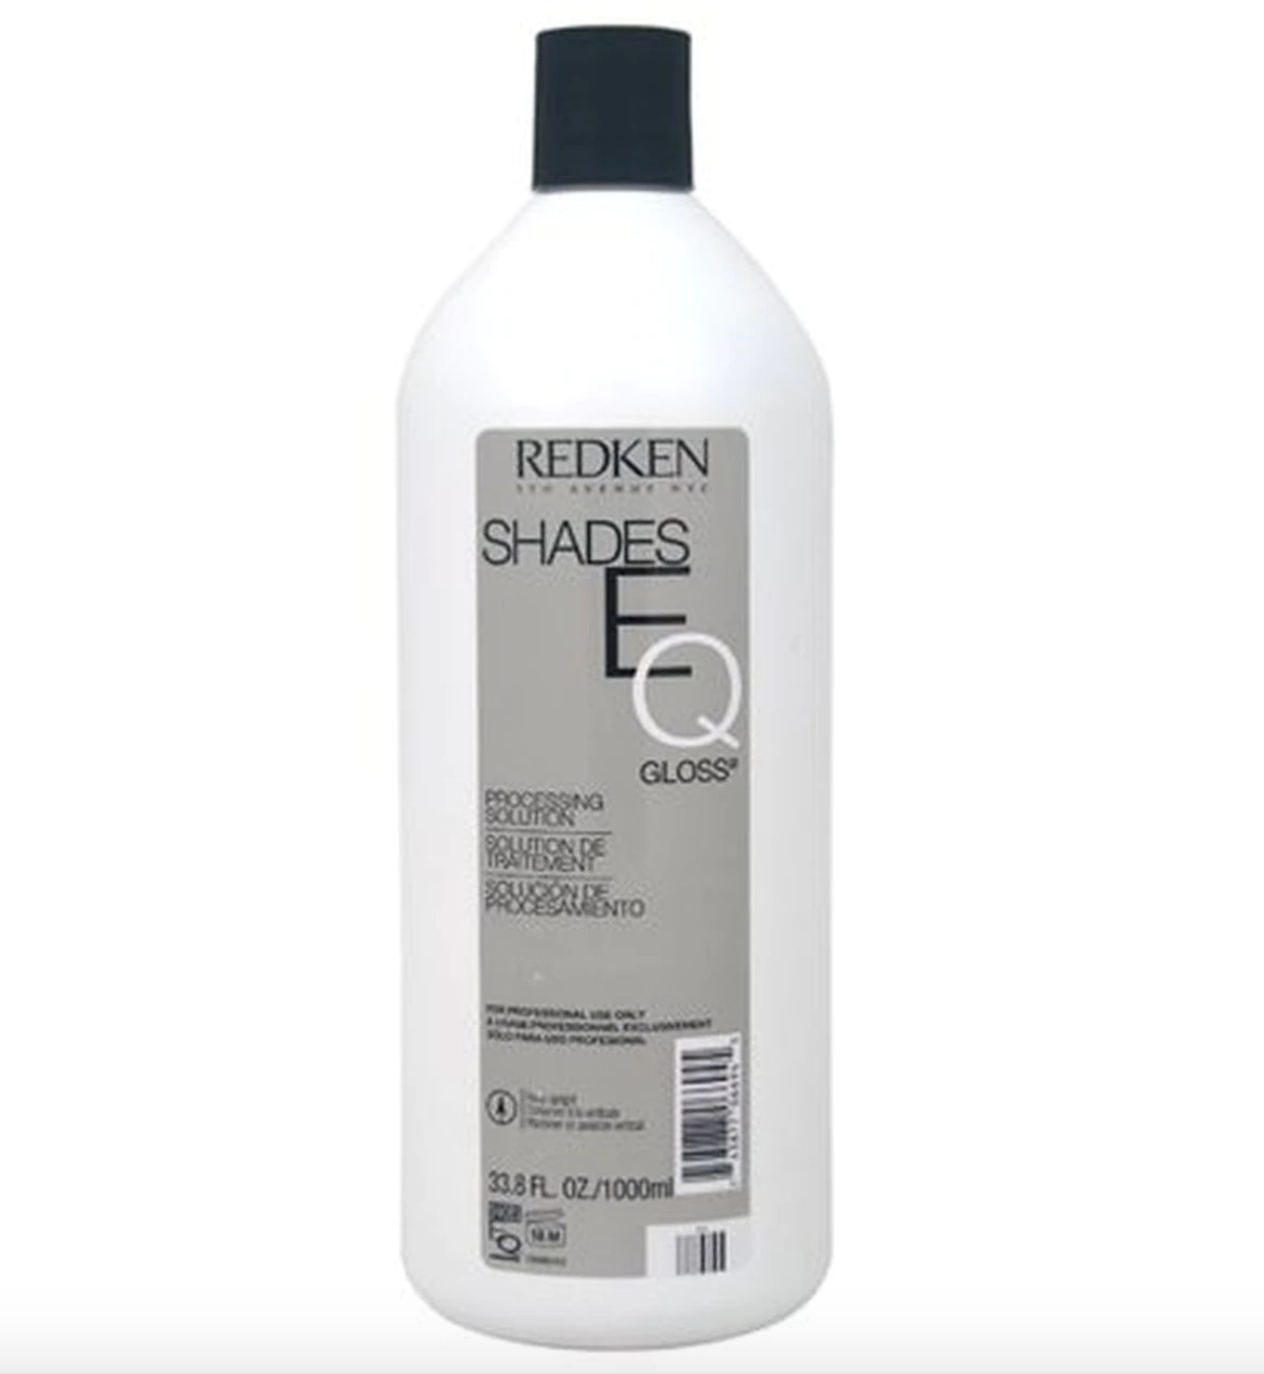 Redken Shades EQ Demi-Permanent Equalizing Conditioning Color Gloss, Ammonia-Free (010VV (10VV) - Lavender Ice) - image 2 of 2